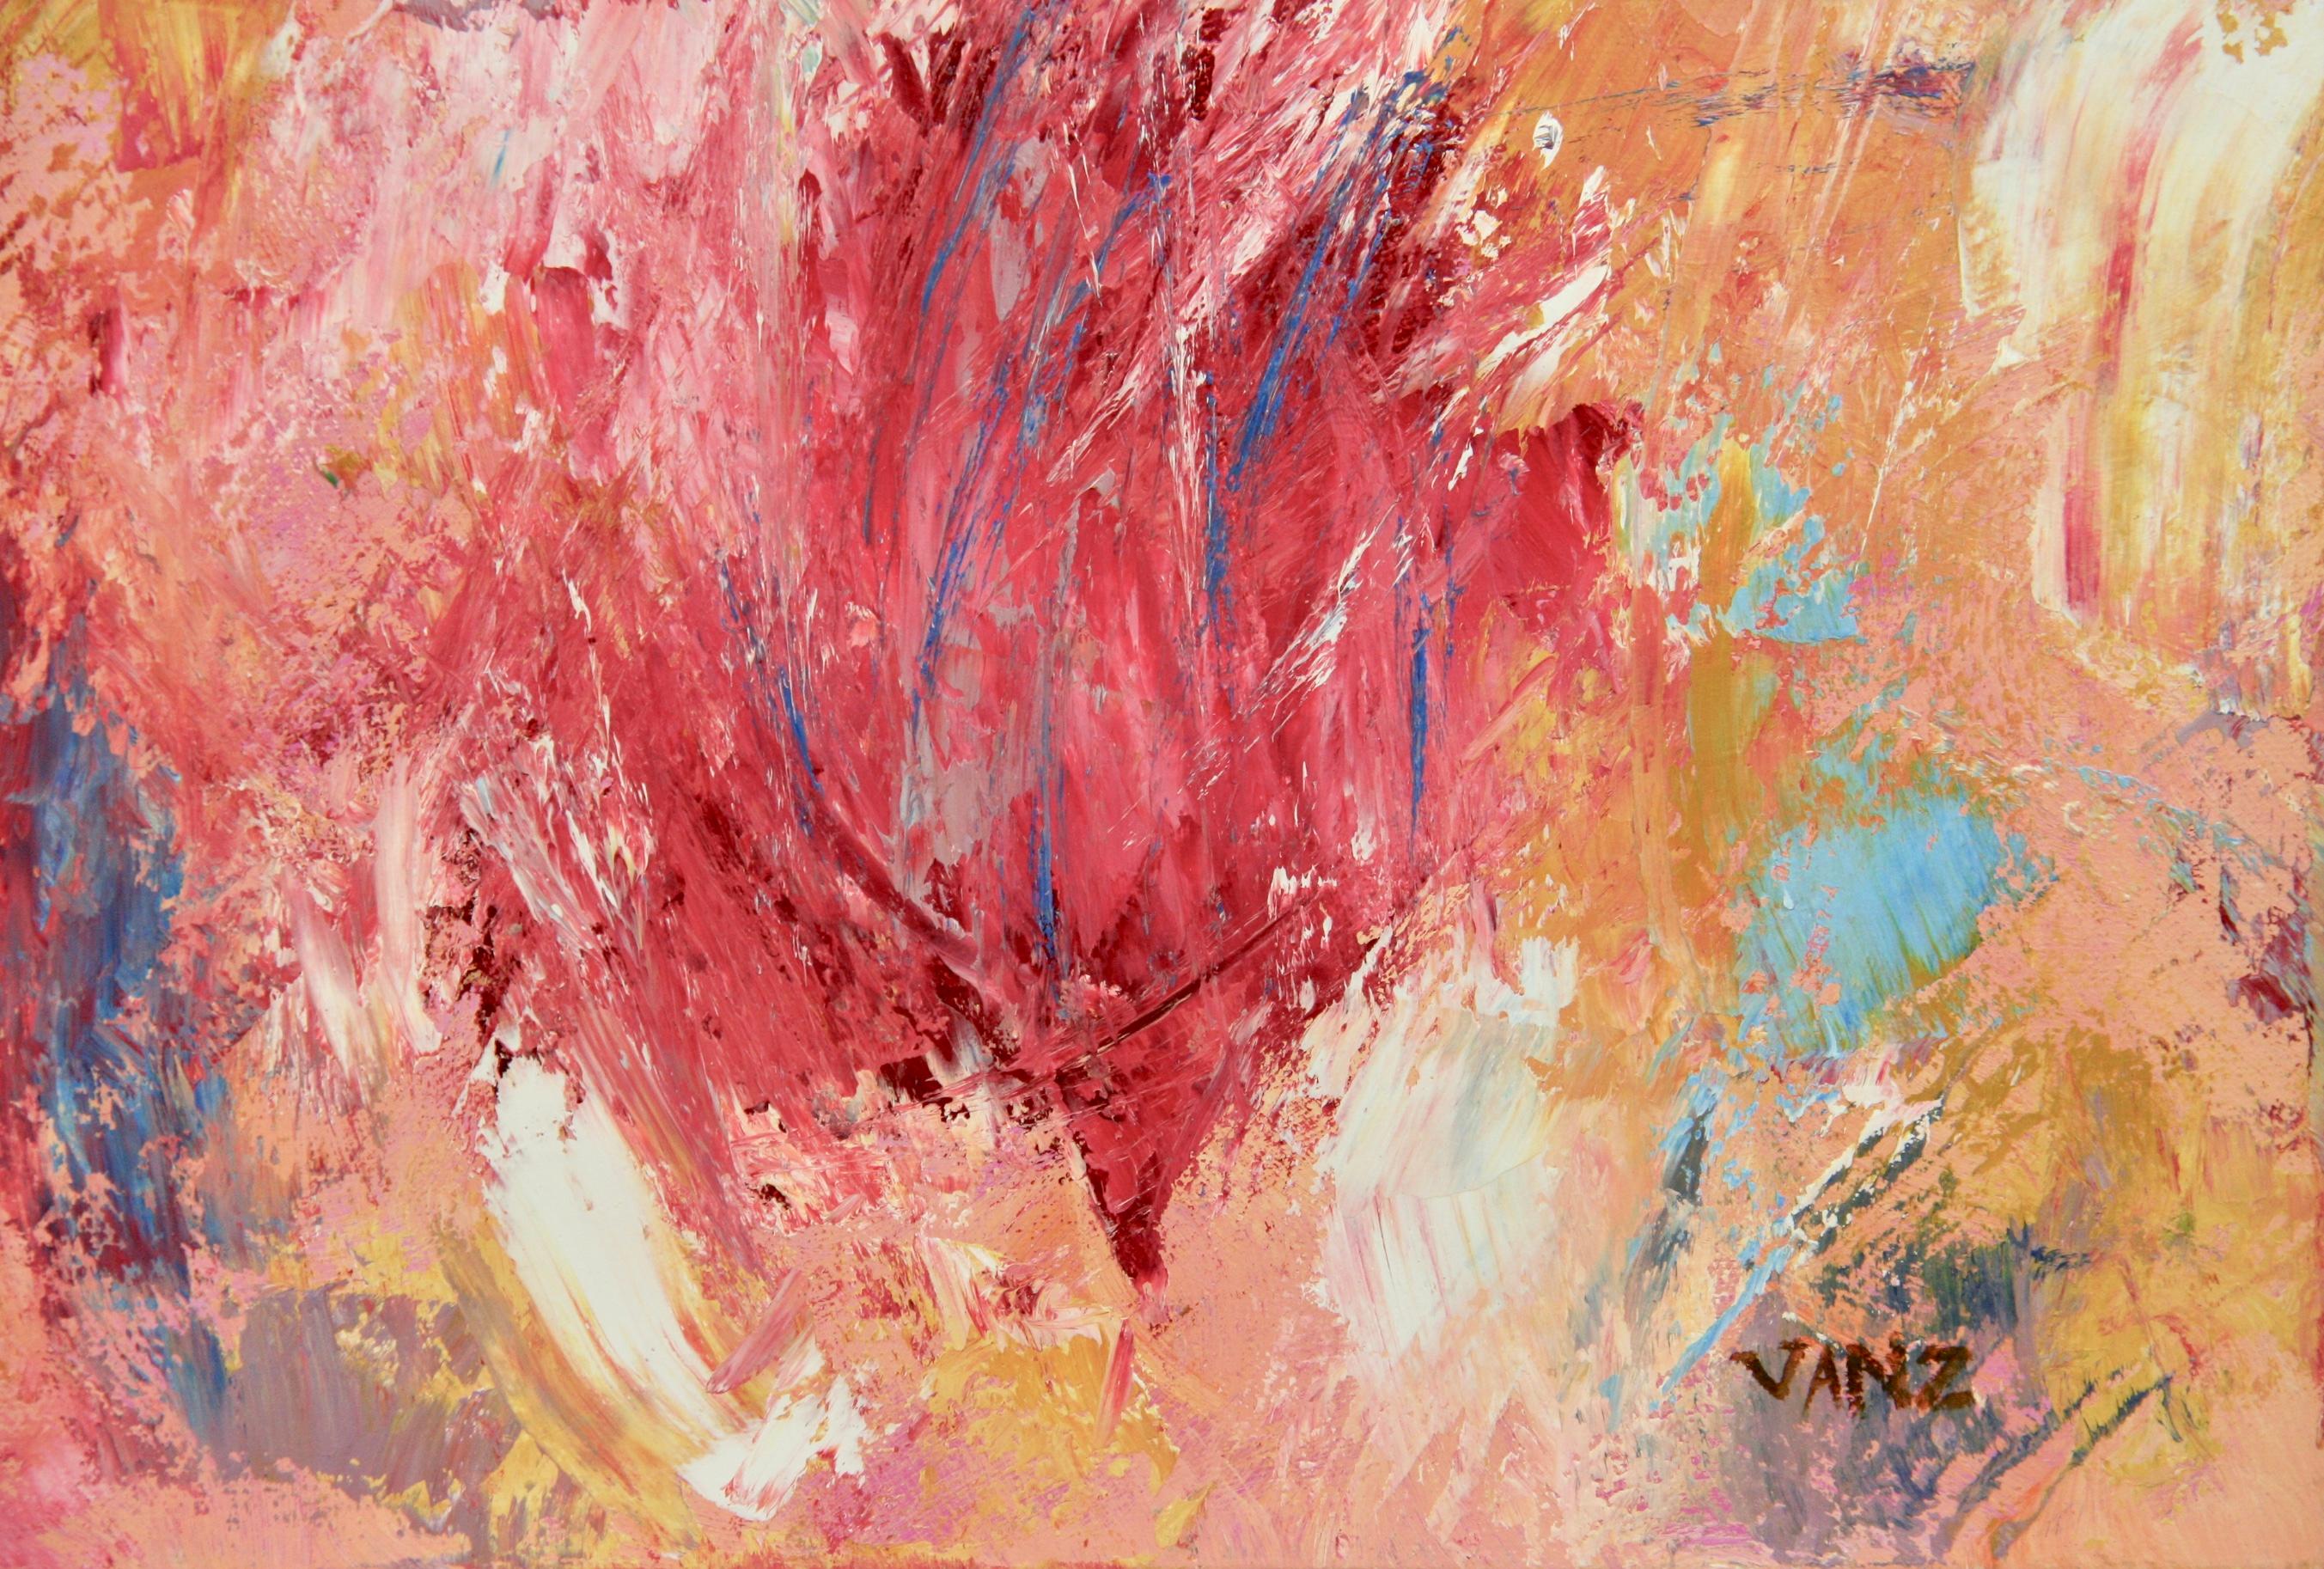 3410 Red and pink abstract, acrylic painting in on a gallery canvas, signed by Vanz .
Rapped canvas